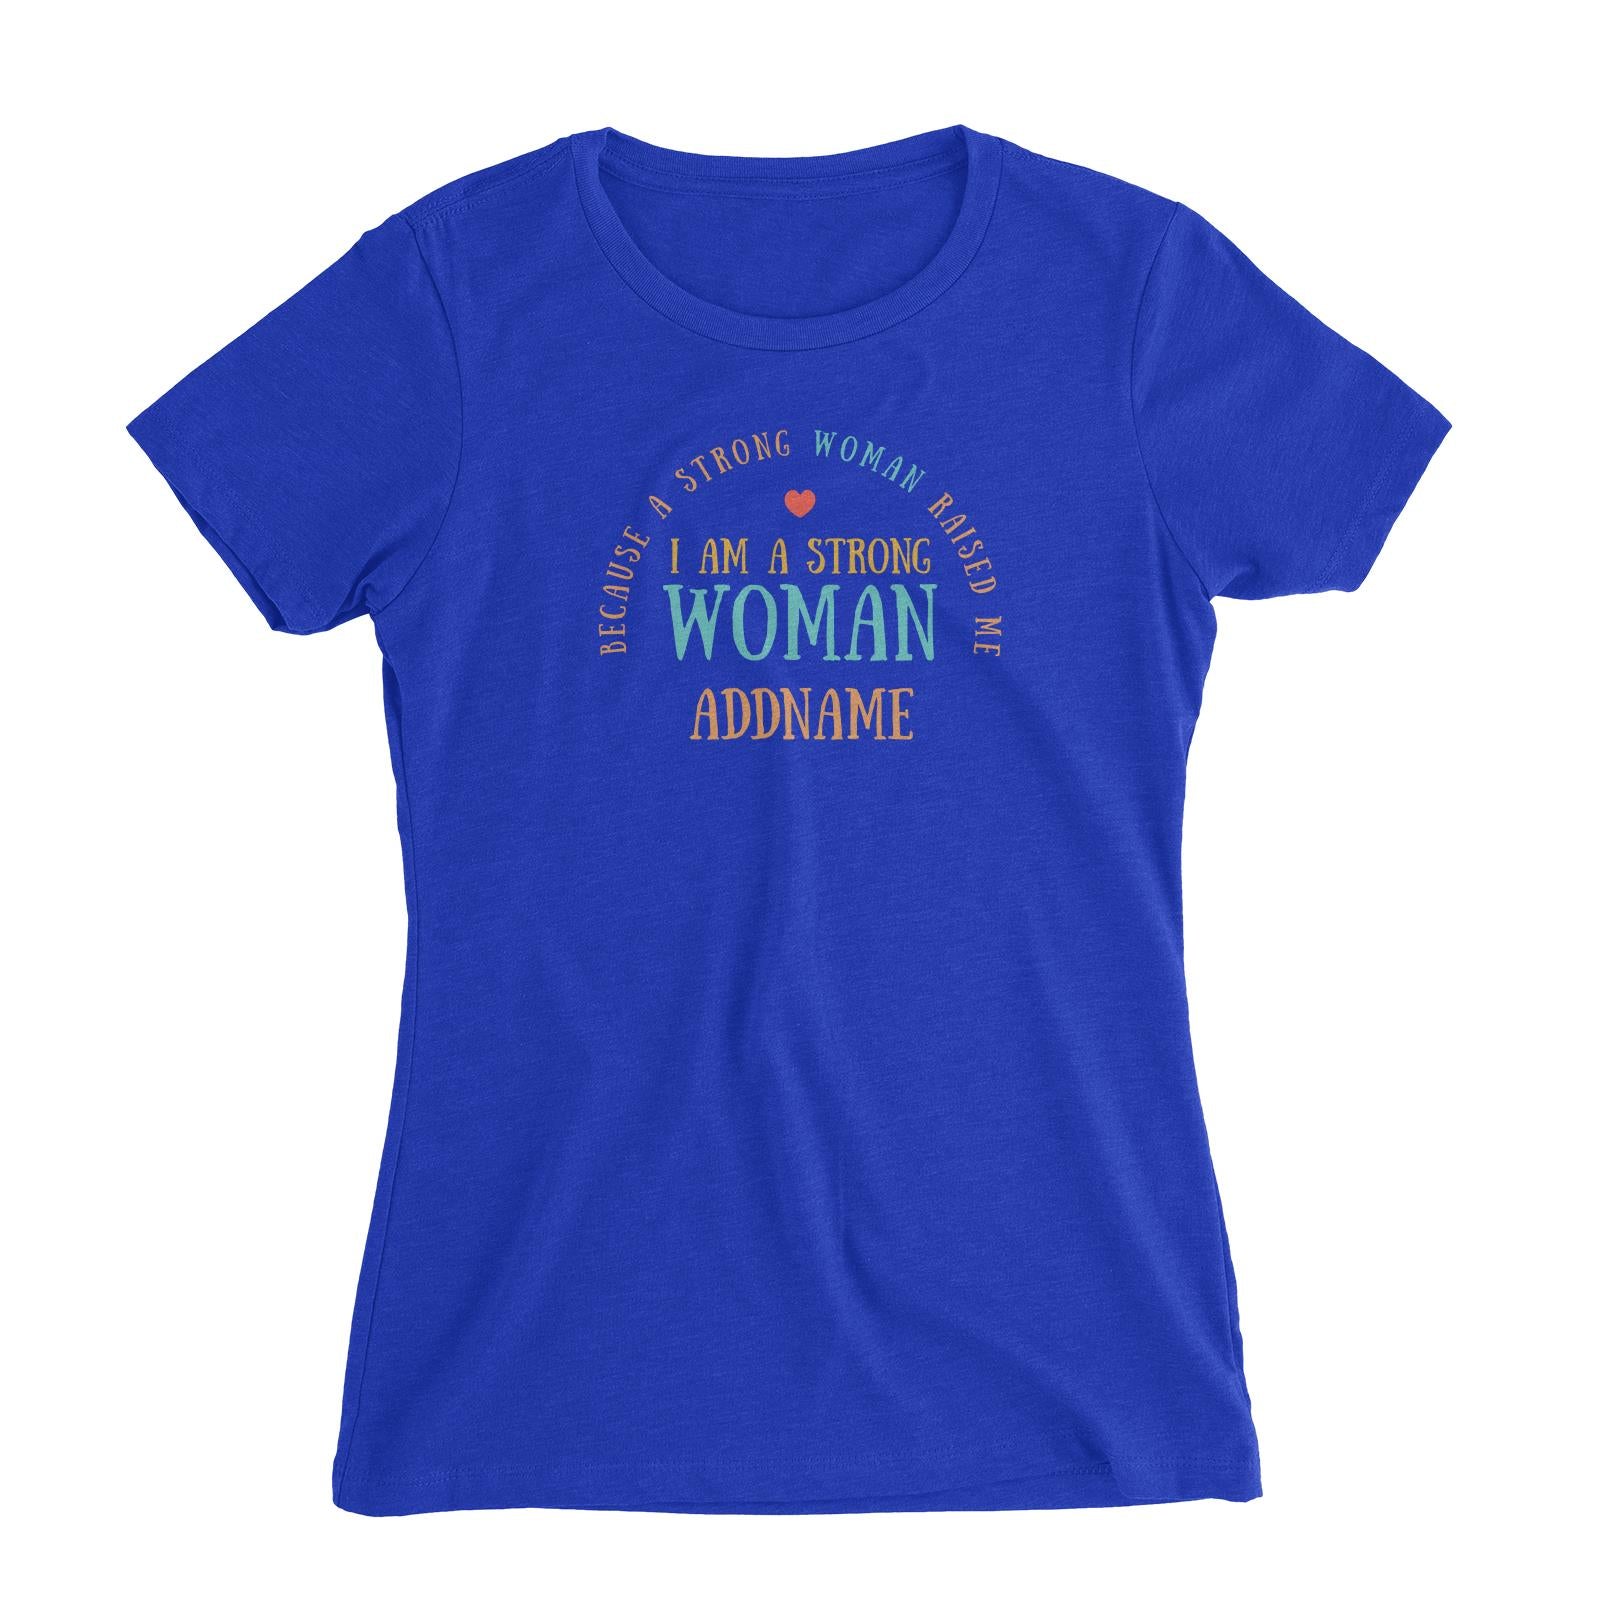 Sweet Mom Quotes 2 I Am A Strong Woman Because A Strong Woman Raised Me Addname Women's Slim Fit T-Shirt